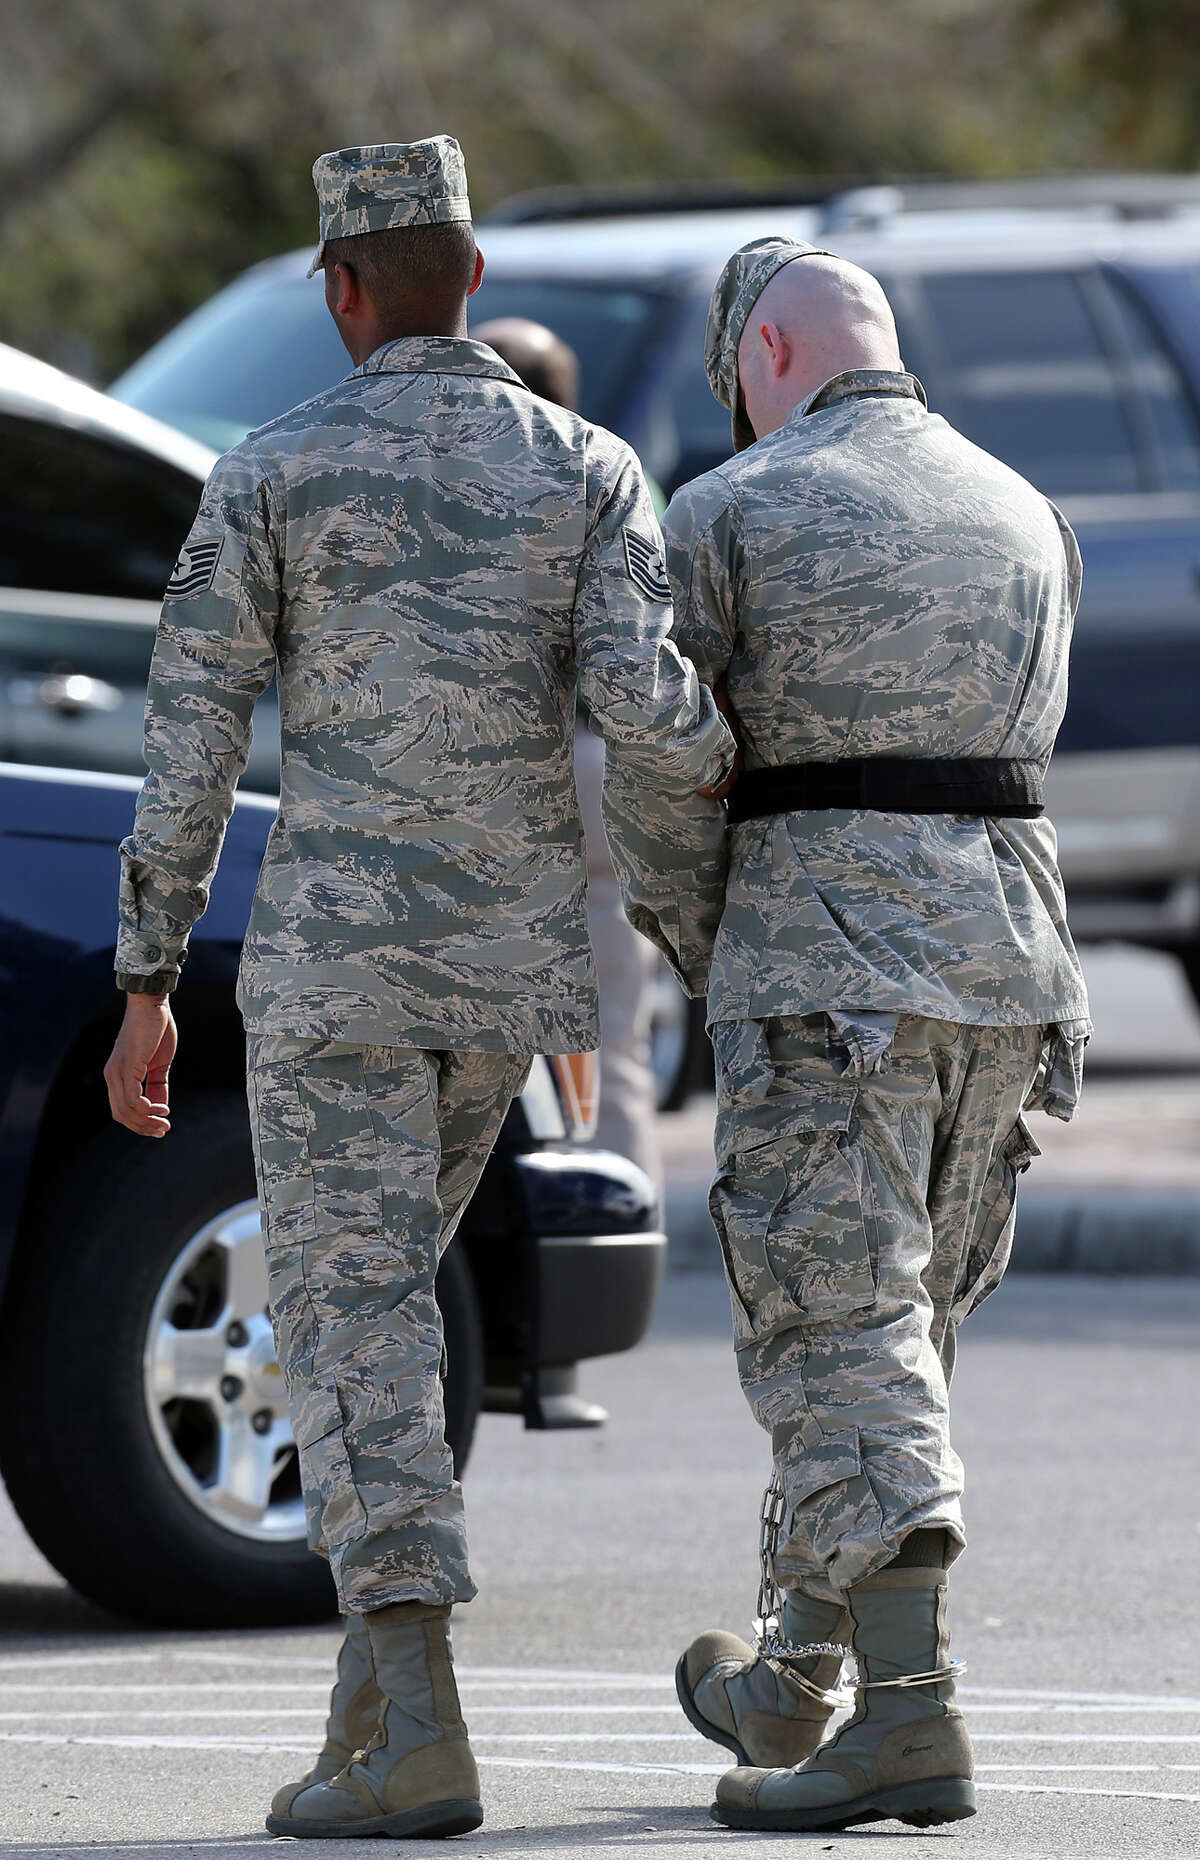 Staff Sgt. Ryan Deraas of the 326th Training Squadron is led away after his conviction at Lackland Air Force Base, Monday, March 4, 2013. Deraas pled guilty to various charges including unprofessional relationships with five technical training students. He was handed a three-month sentence, dishonorably discharged and a reduction in rank.